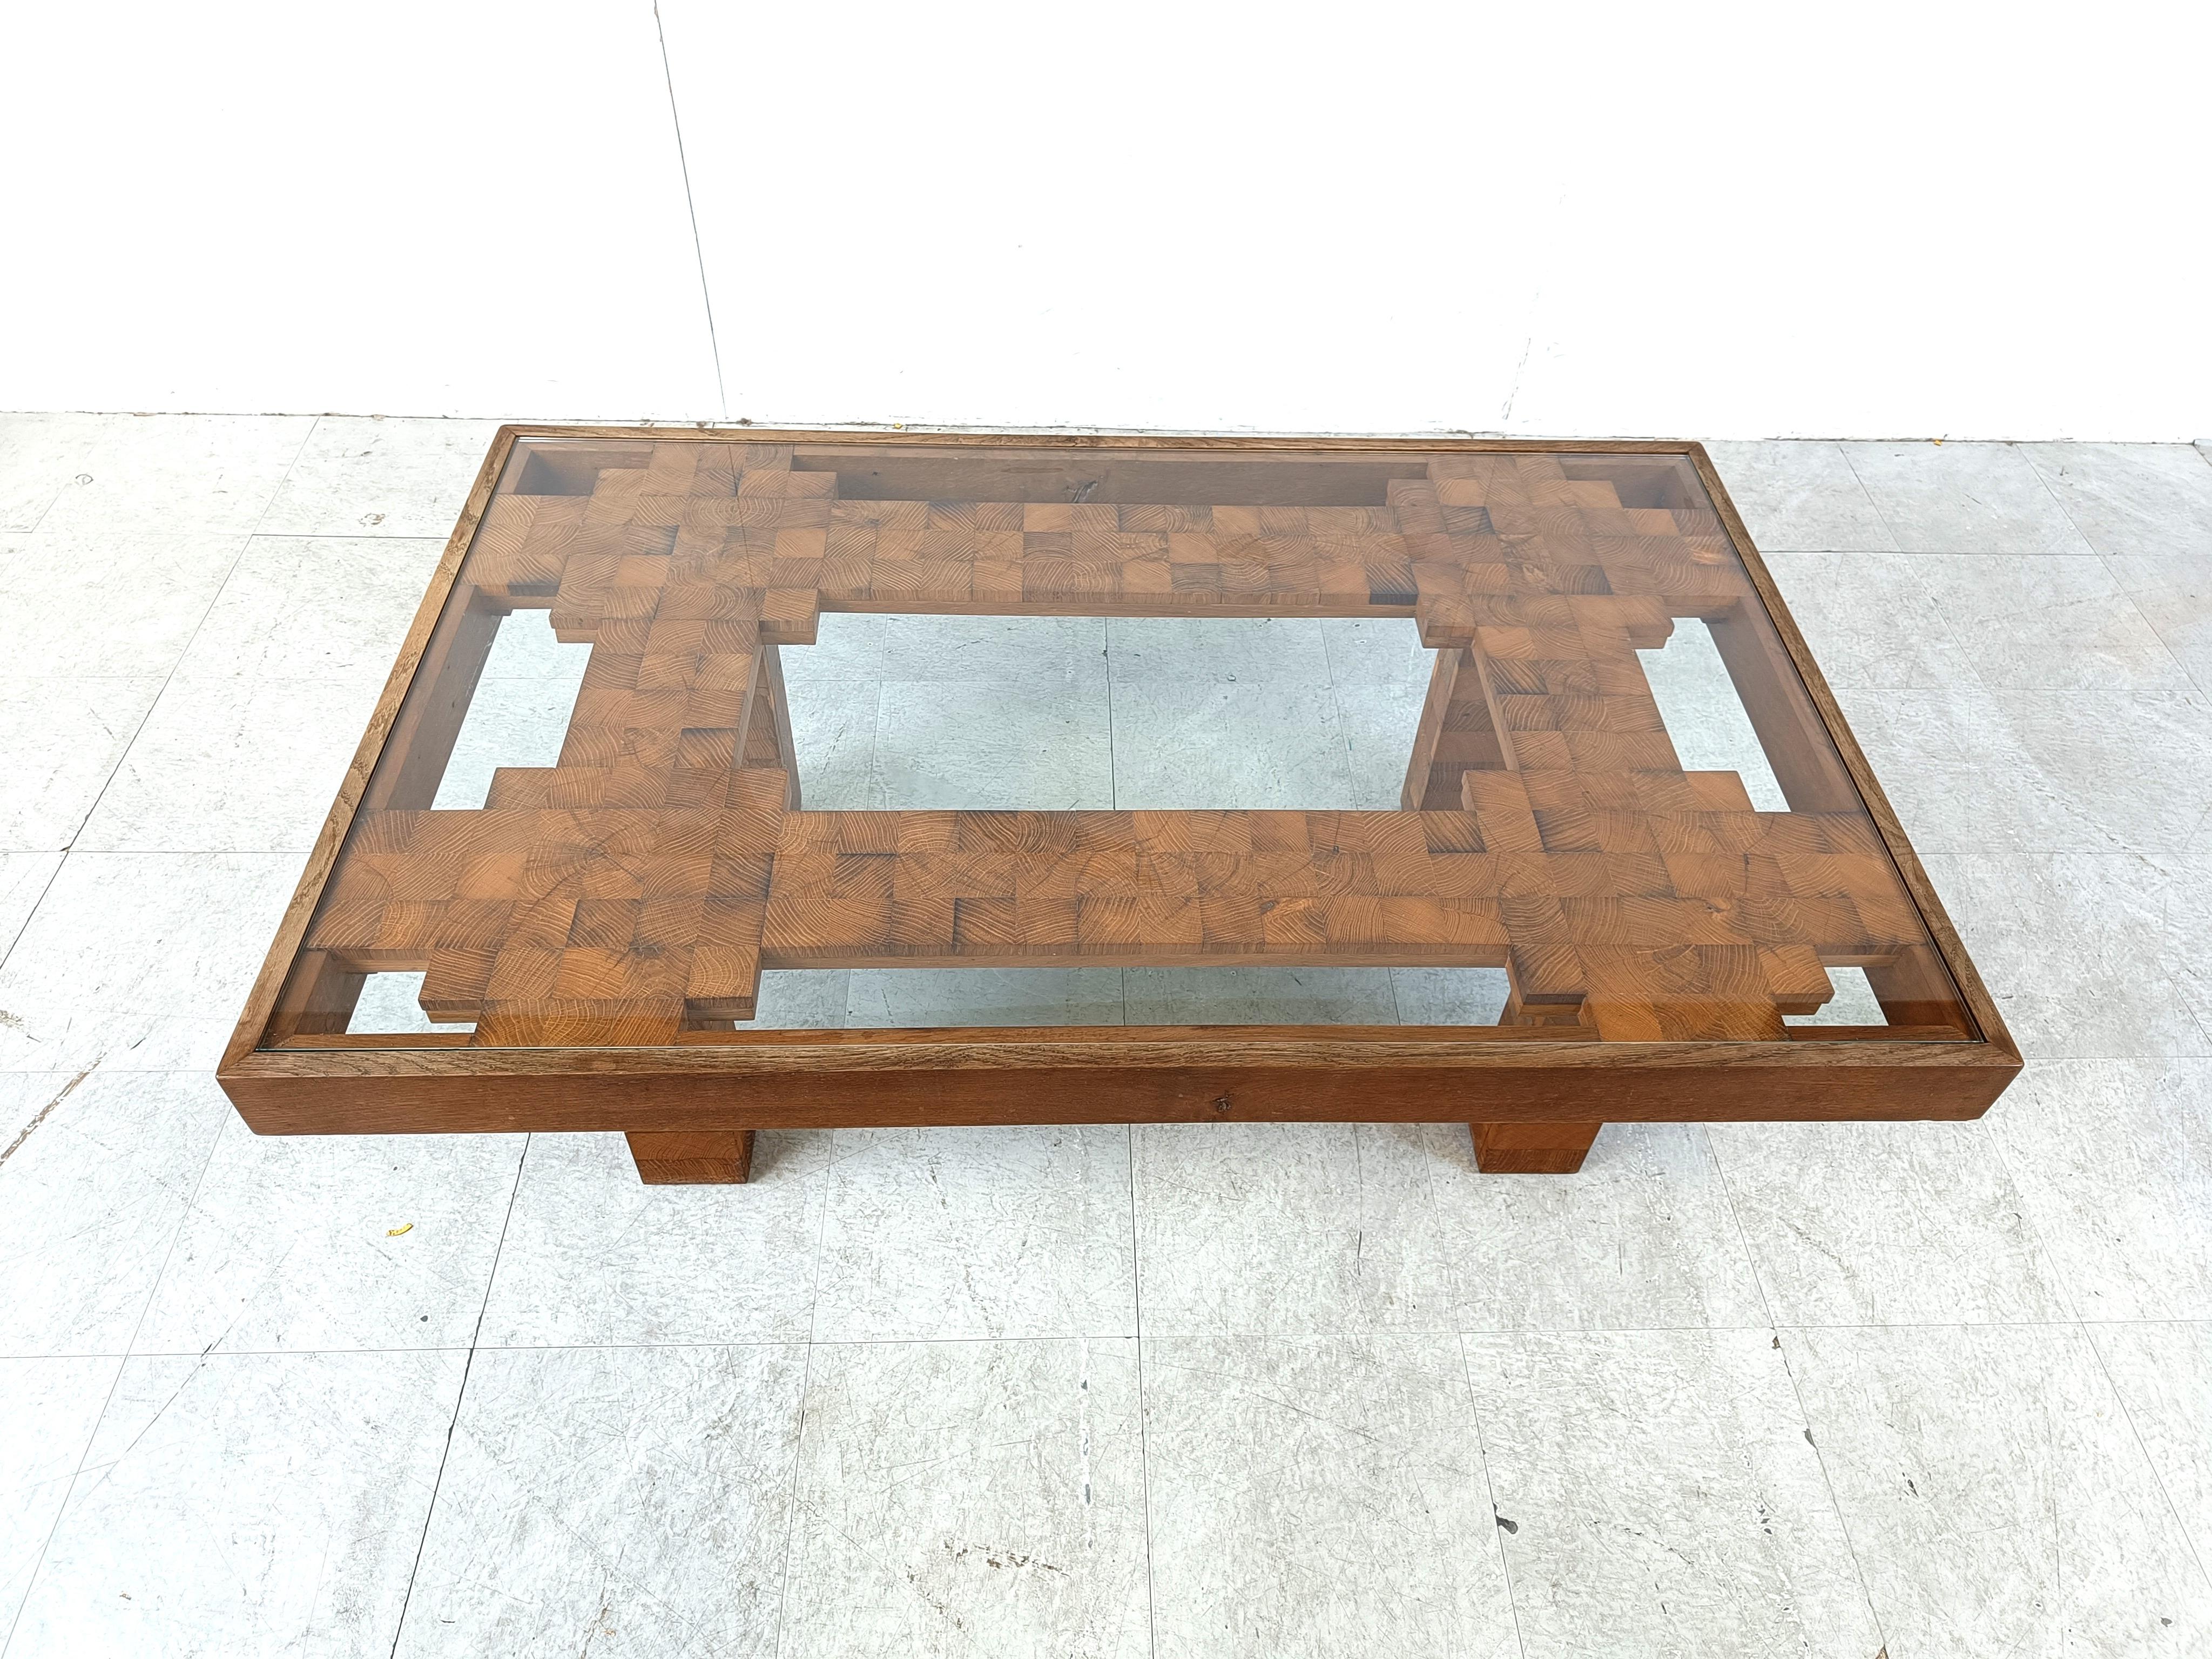 Very rare mid century mosaic coffee table witha rectangular clear glass top. 

Beautifully crafted coffee table with a timeless architectural design.

Gorgeous natural wooden veins troughout.

1960s - Belgium

Height: 44cm
Width: 134cm
Lenght: